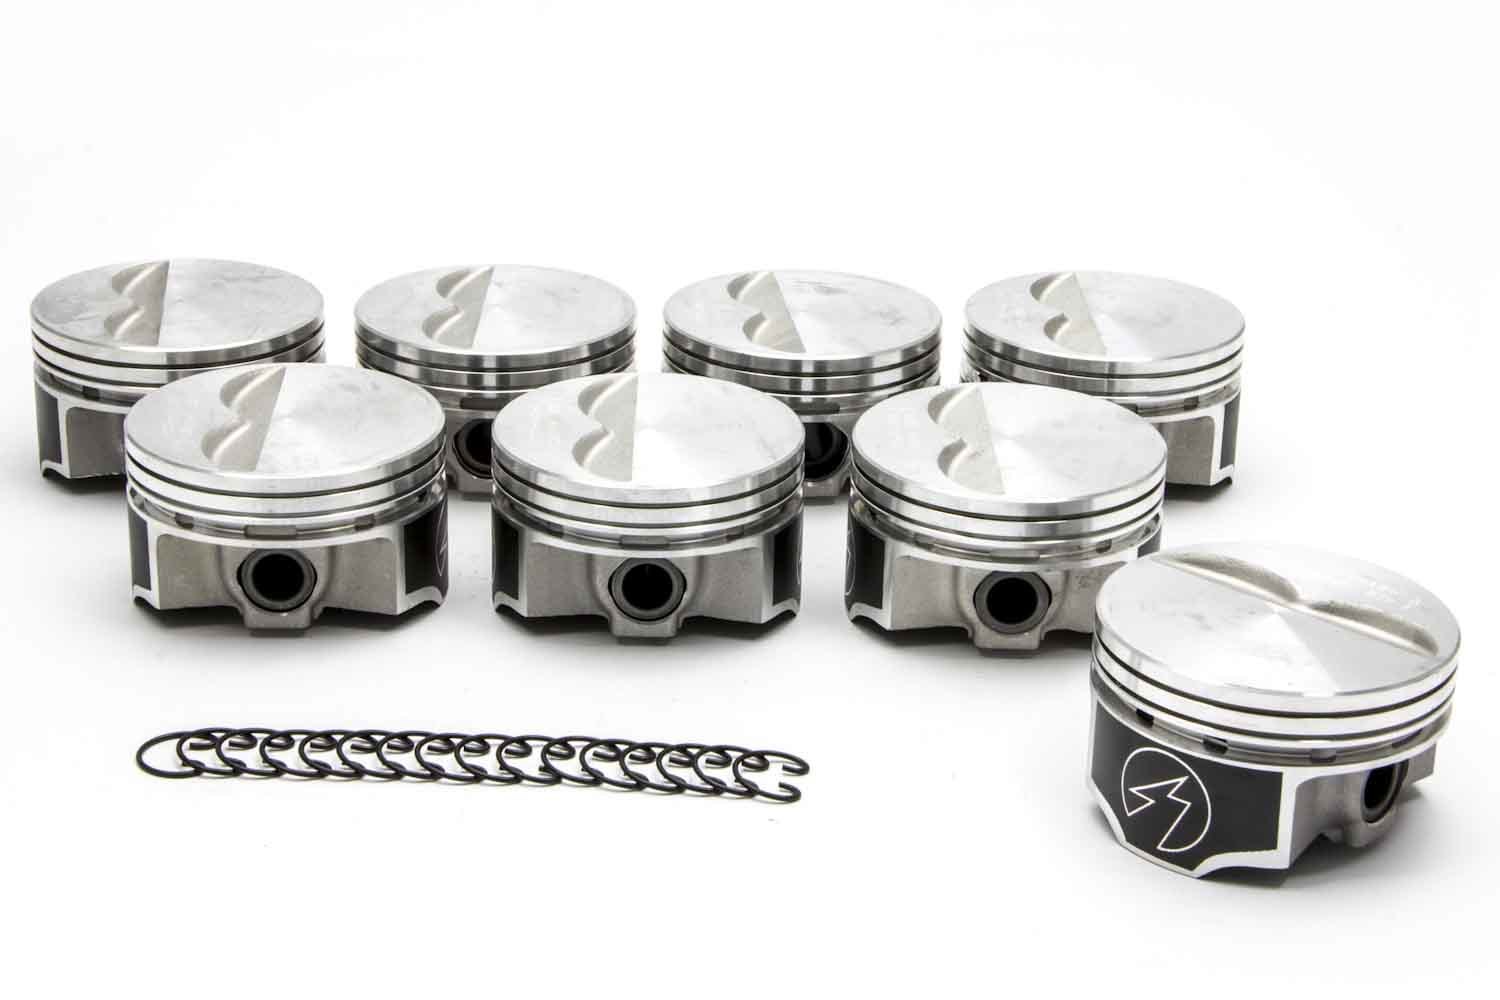 Sealed Power L2490NF30 Piston, Speed Pro, Forged, 4.030 in Bore, 1/16 x 1/16 x 3/16 in Ring Grooves, Minus 3.40 cc, Coated Skirt, Small Block Chevy, Set of 8